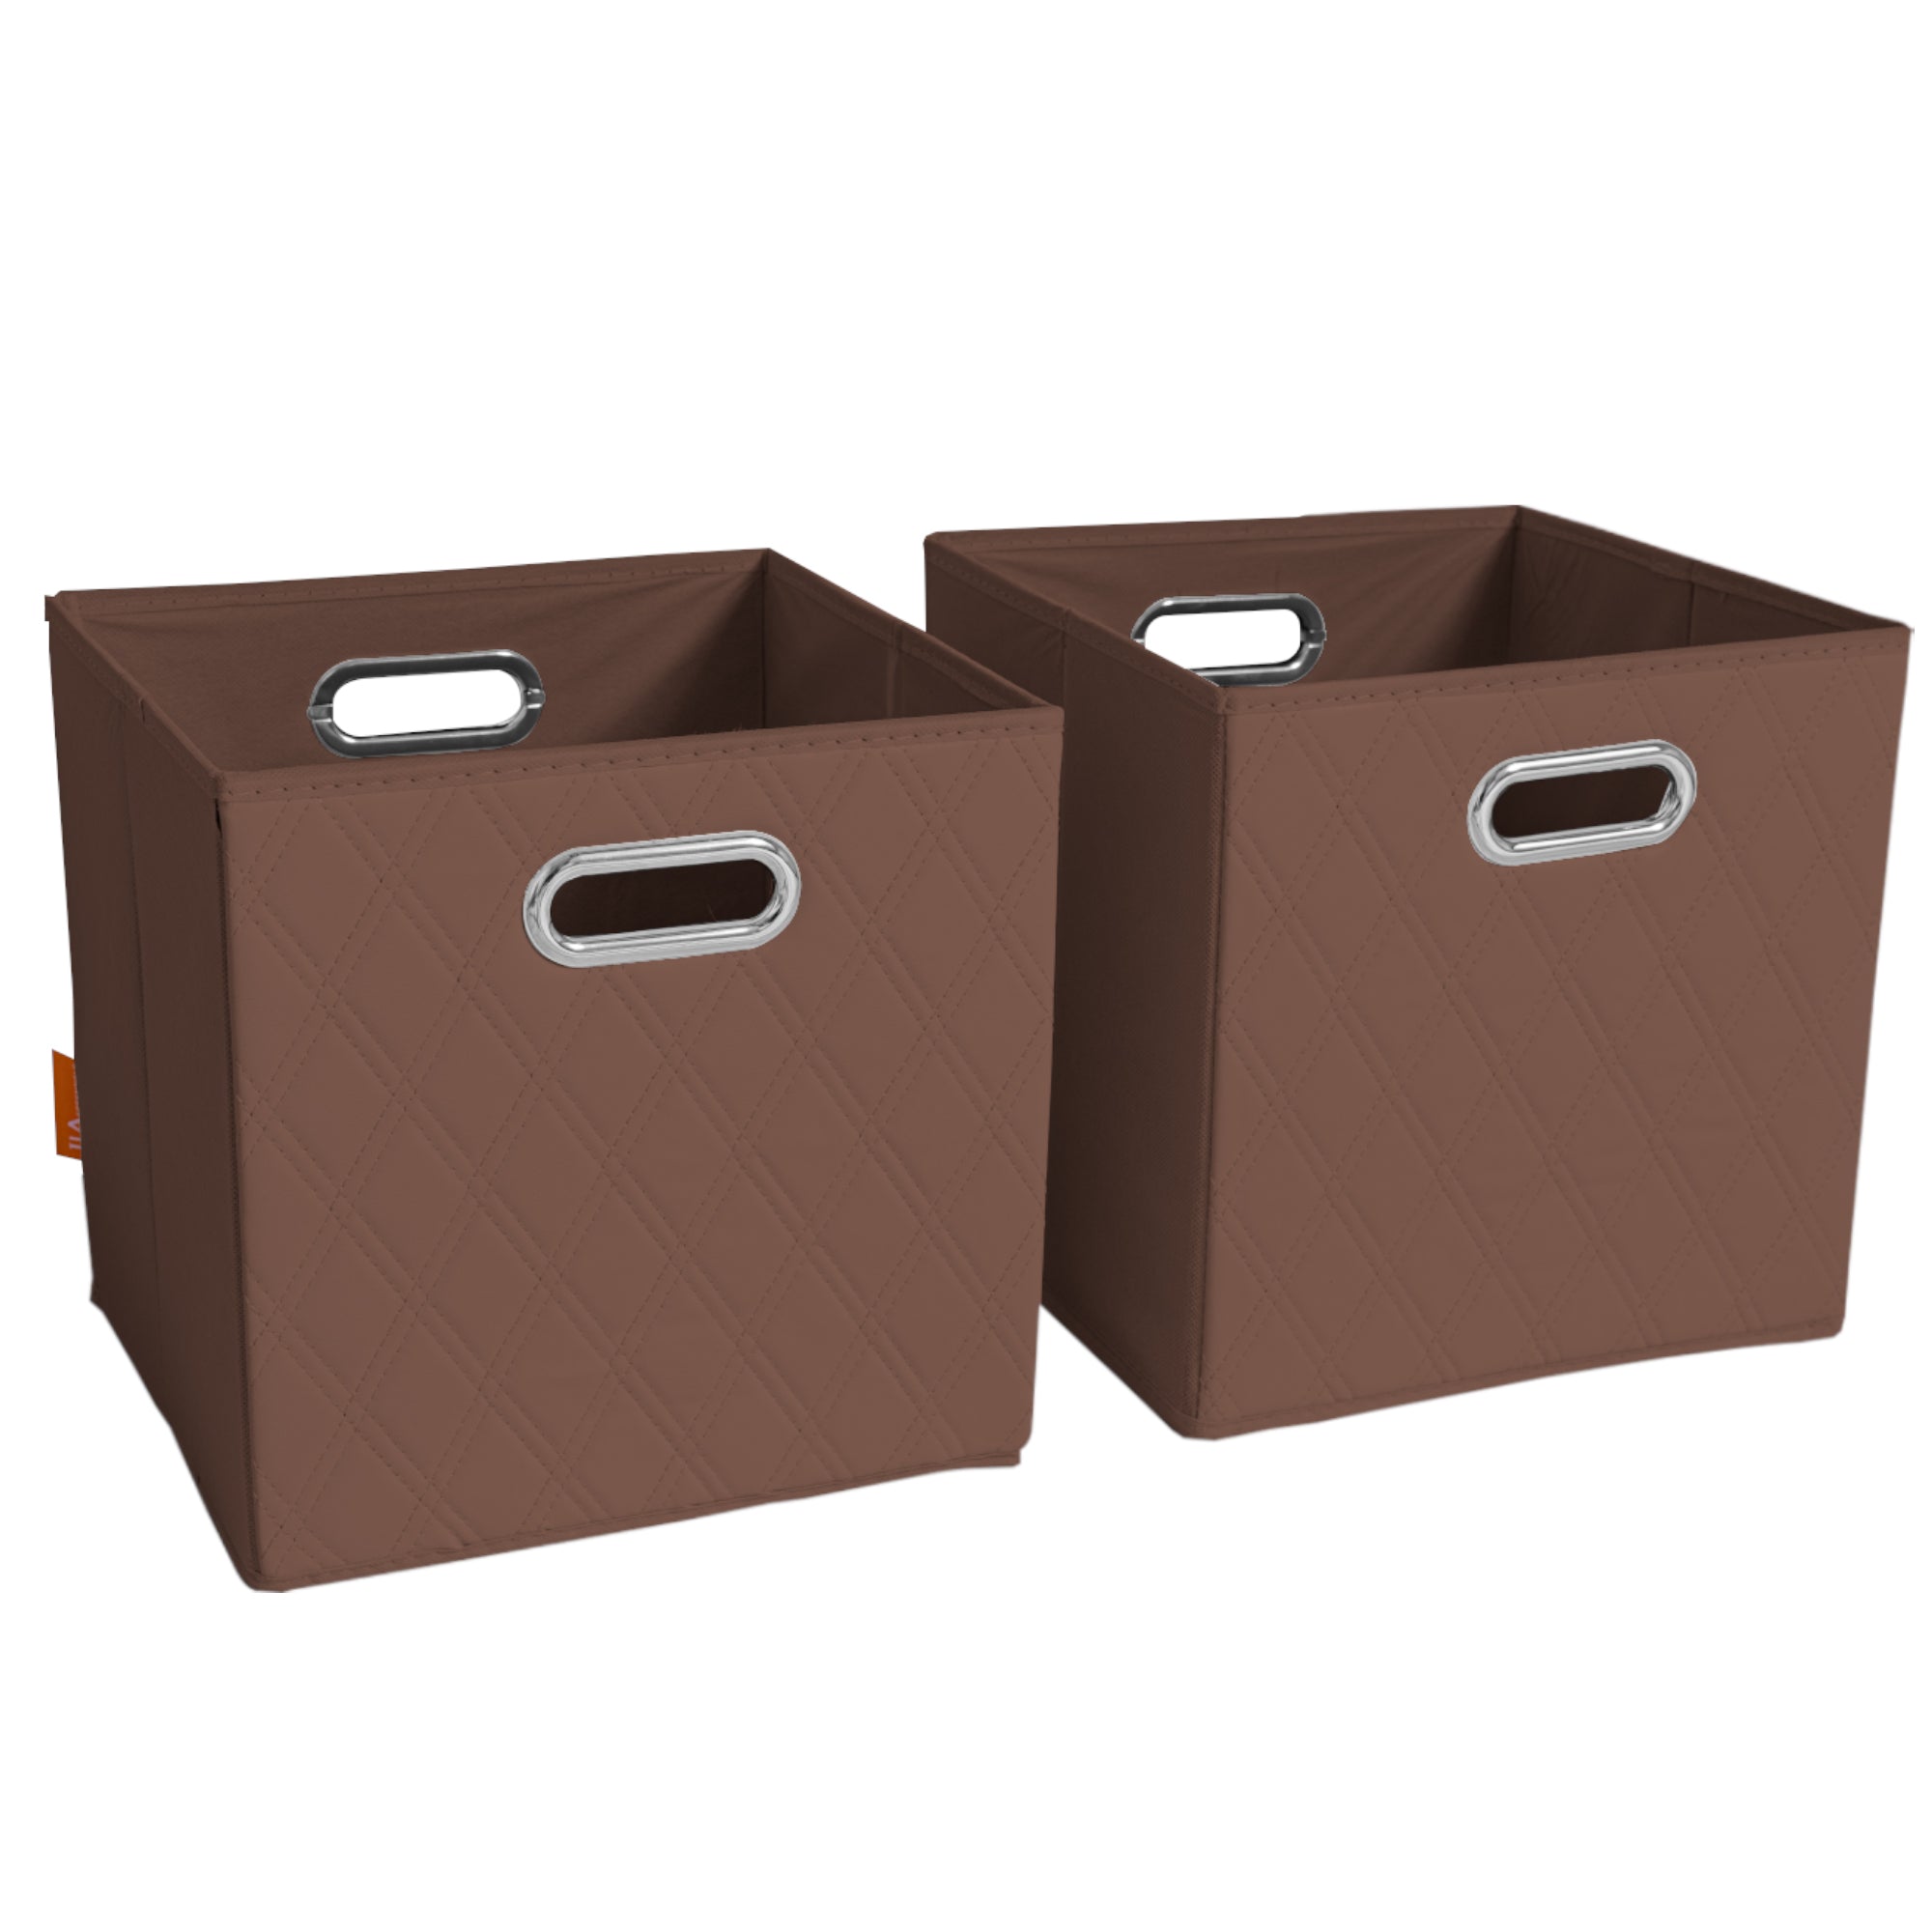 JIAessentials 11 inch Foldable Diamond Patterned Faux Leather Storage Cube Bins Set of Two with Dual Handles - 11" Brown